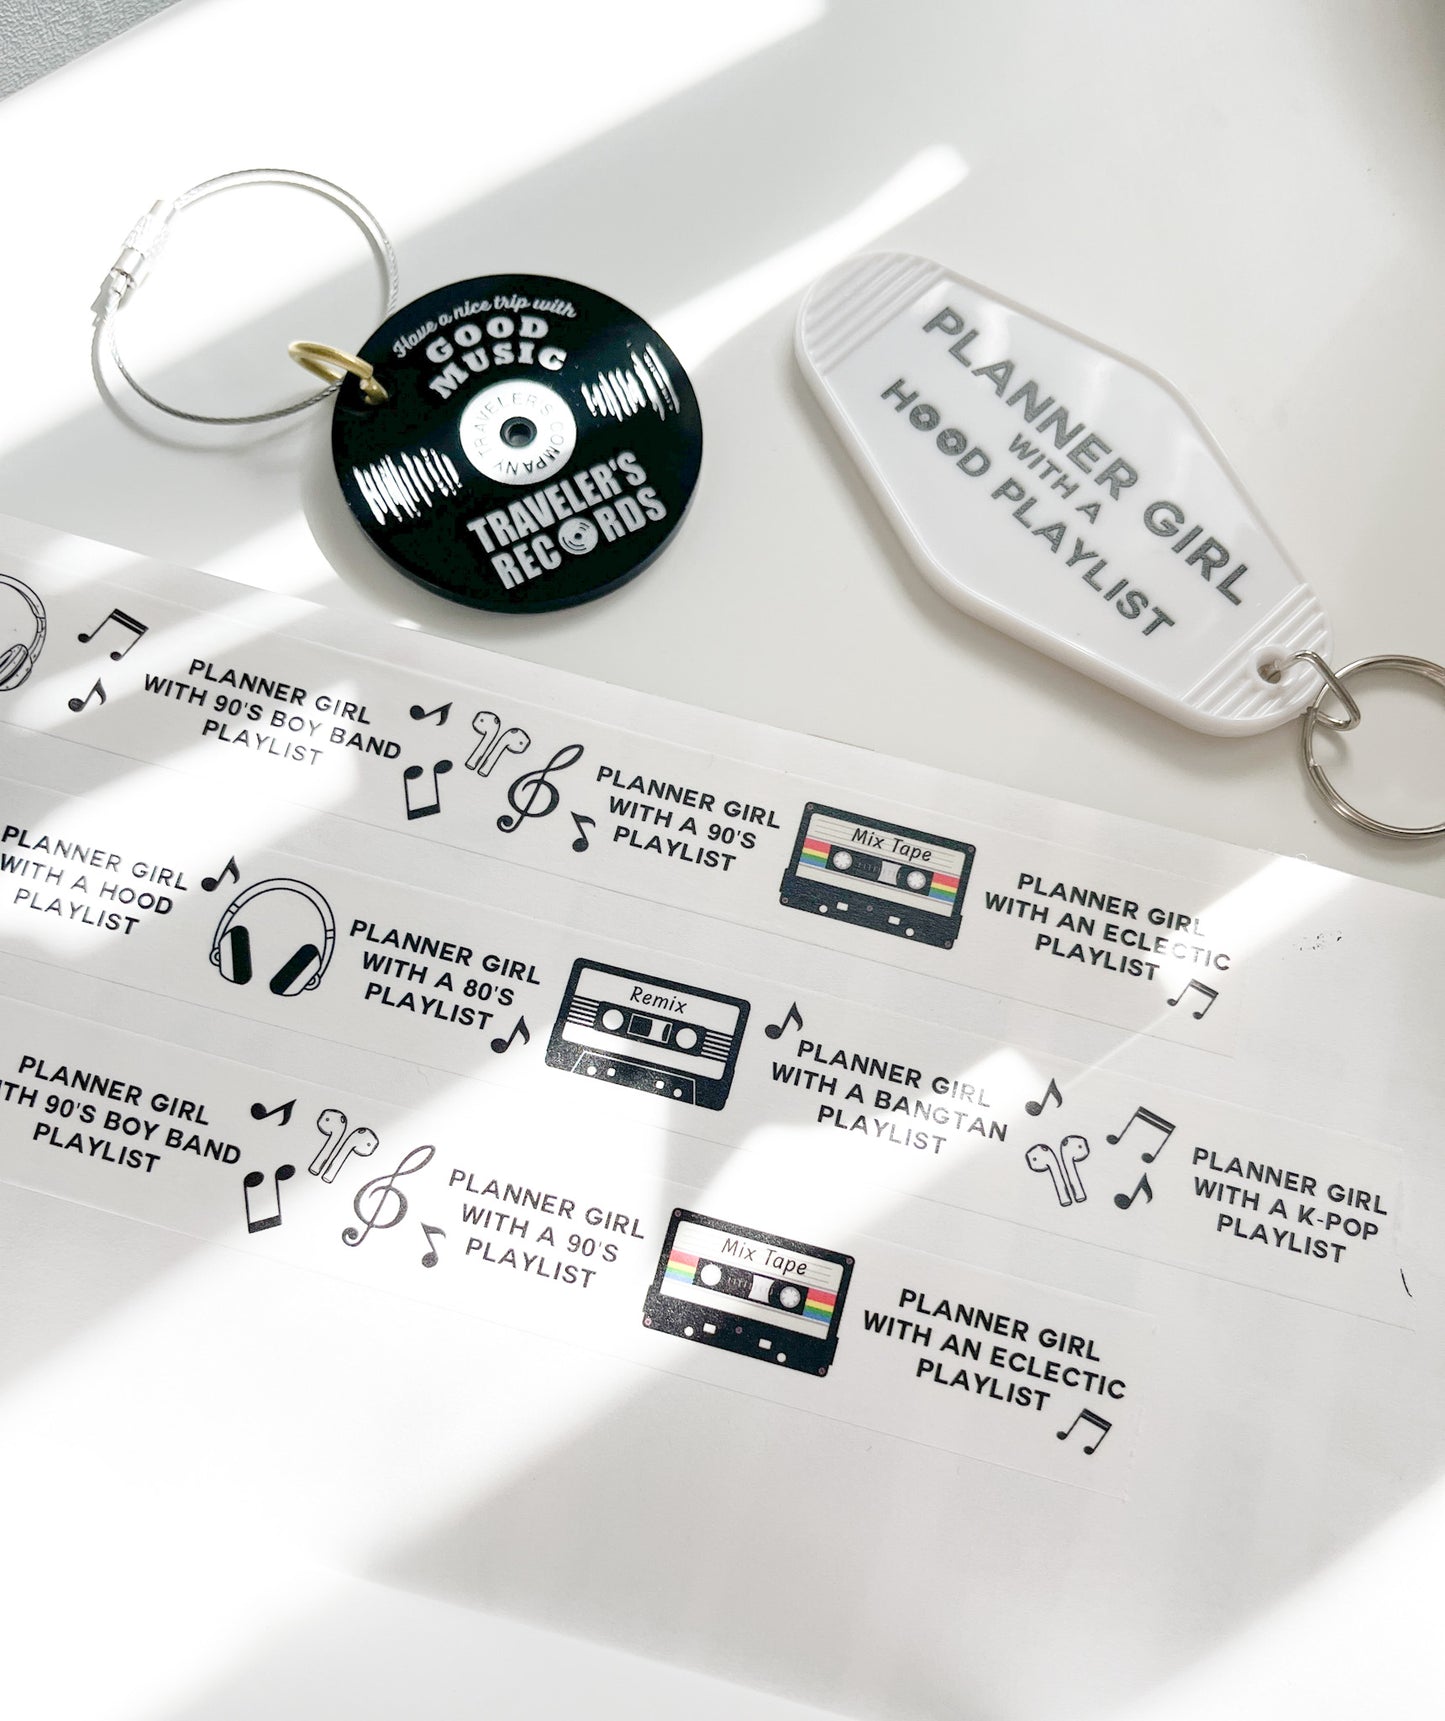 Planner Girl Mix Tape Washi Tape